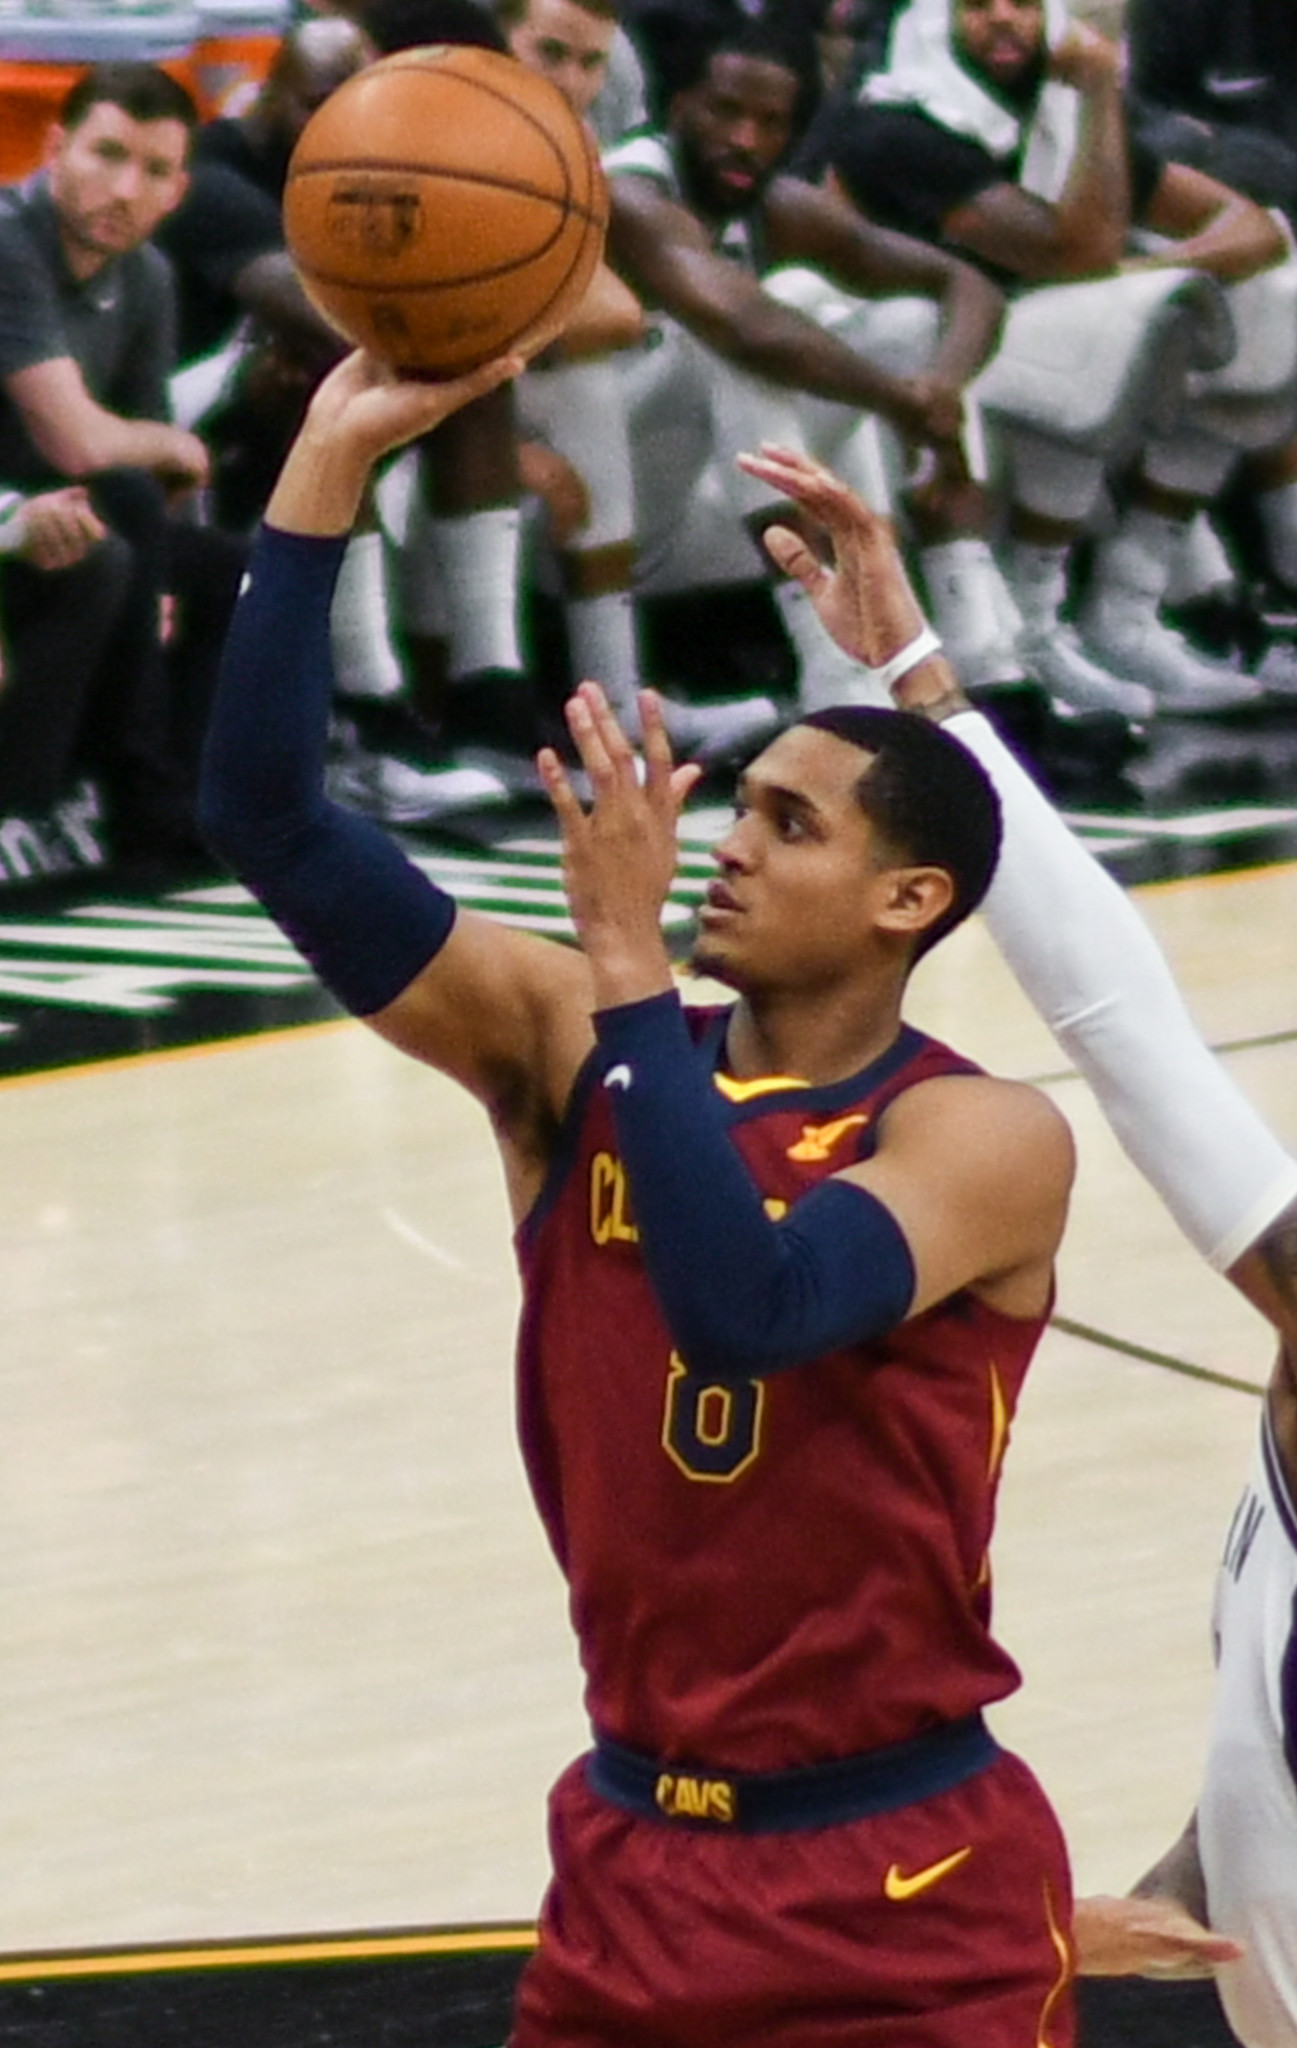 The loss of Jordan Clarkson from their line-up for the Asian Games is another blow for the Philippines